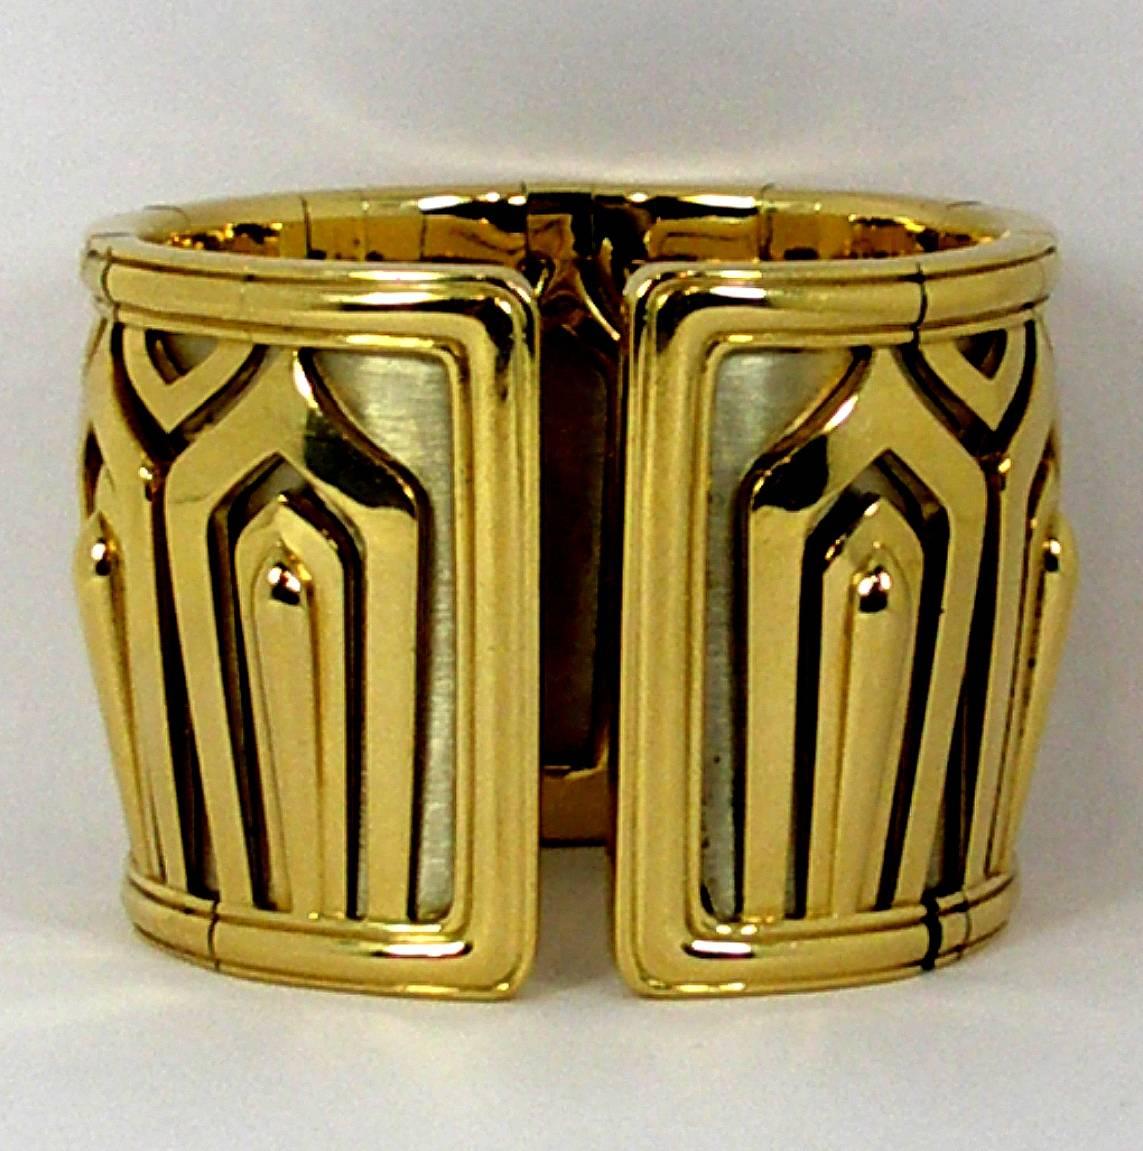 This rare, elegant Cartier cuff is made of 18K yellow gold, architectural motifs cut out over a background of 18k white gold. Measuring 1 7/8 inch wide (47mm), this outstanding Cartier cuff weighs a hefty 255 grams! Signed Cartier 750 and numbered